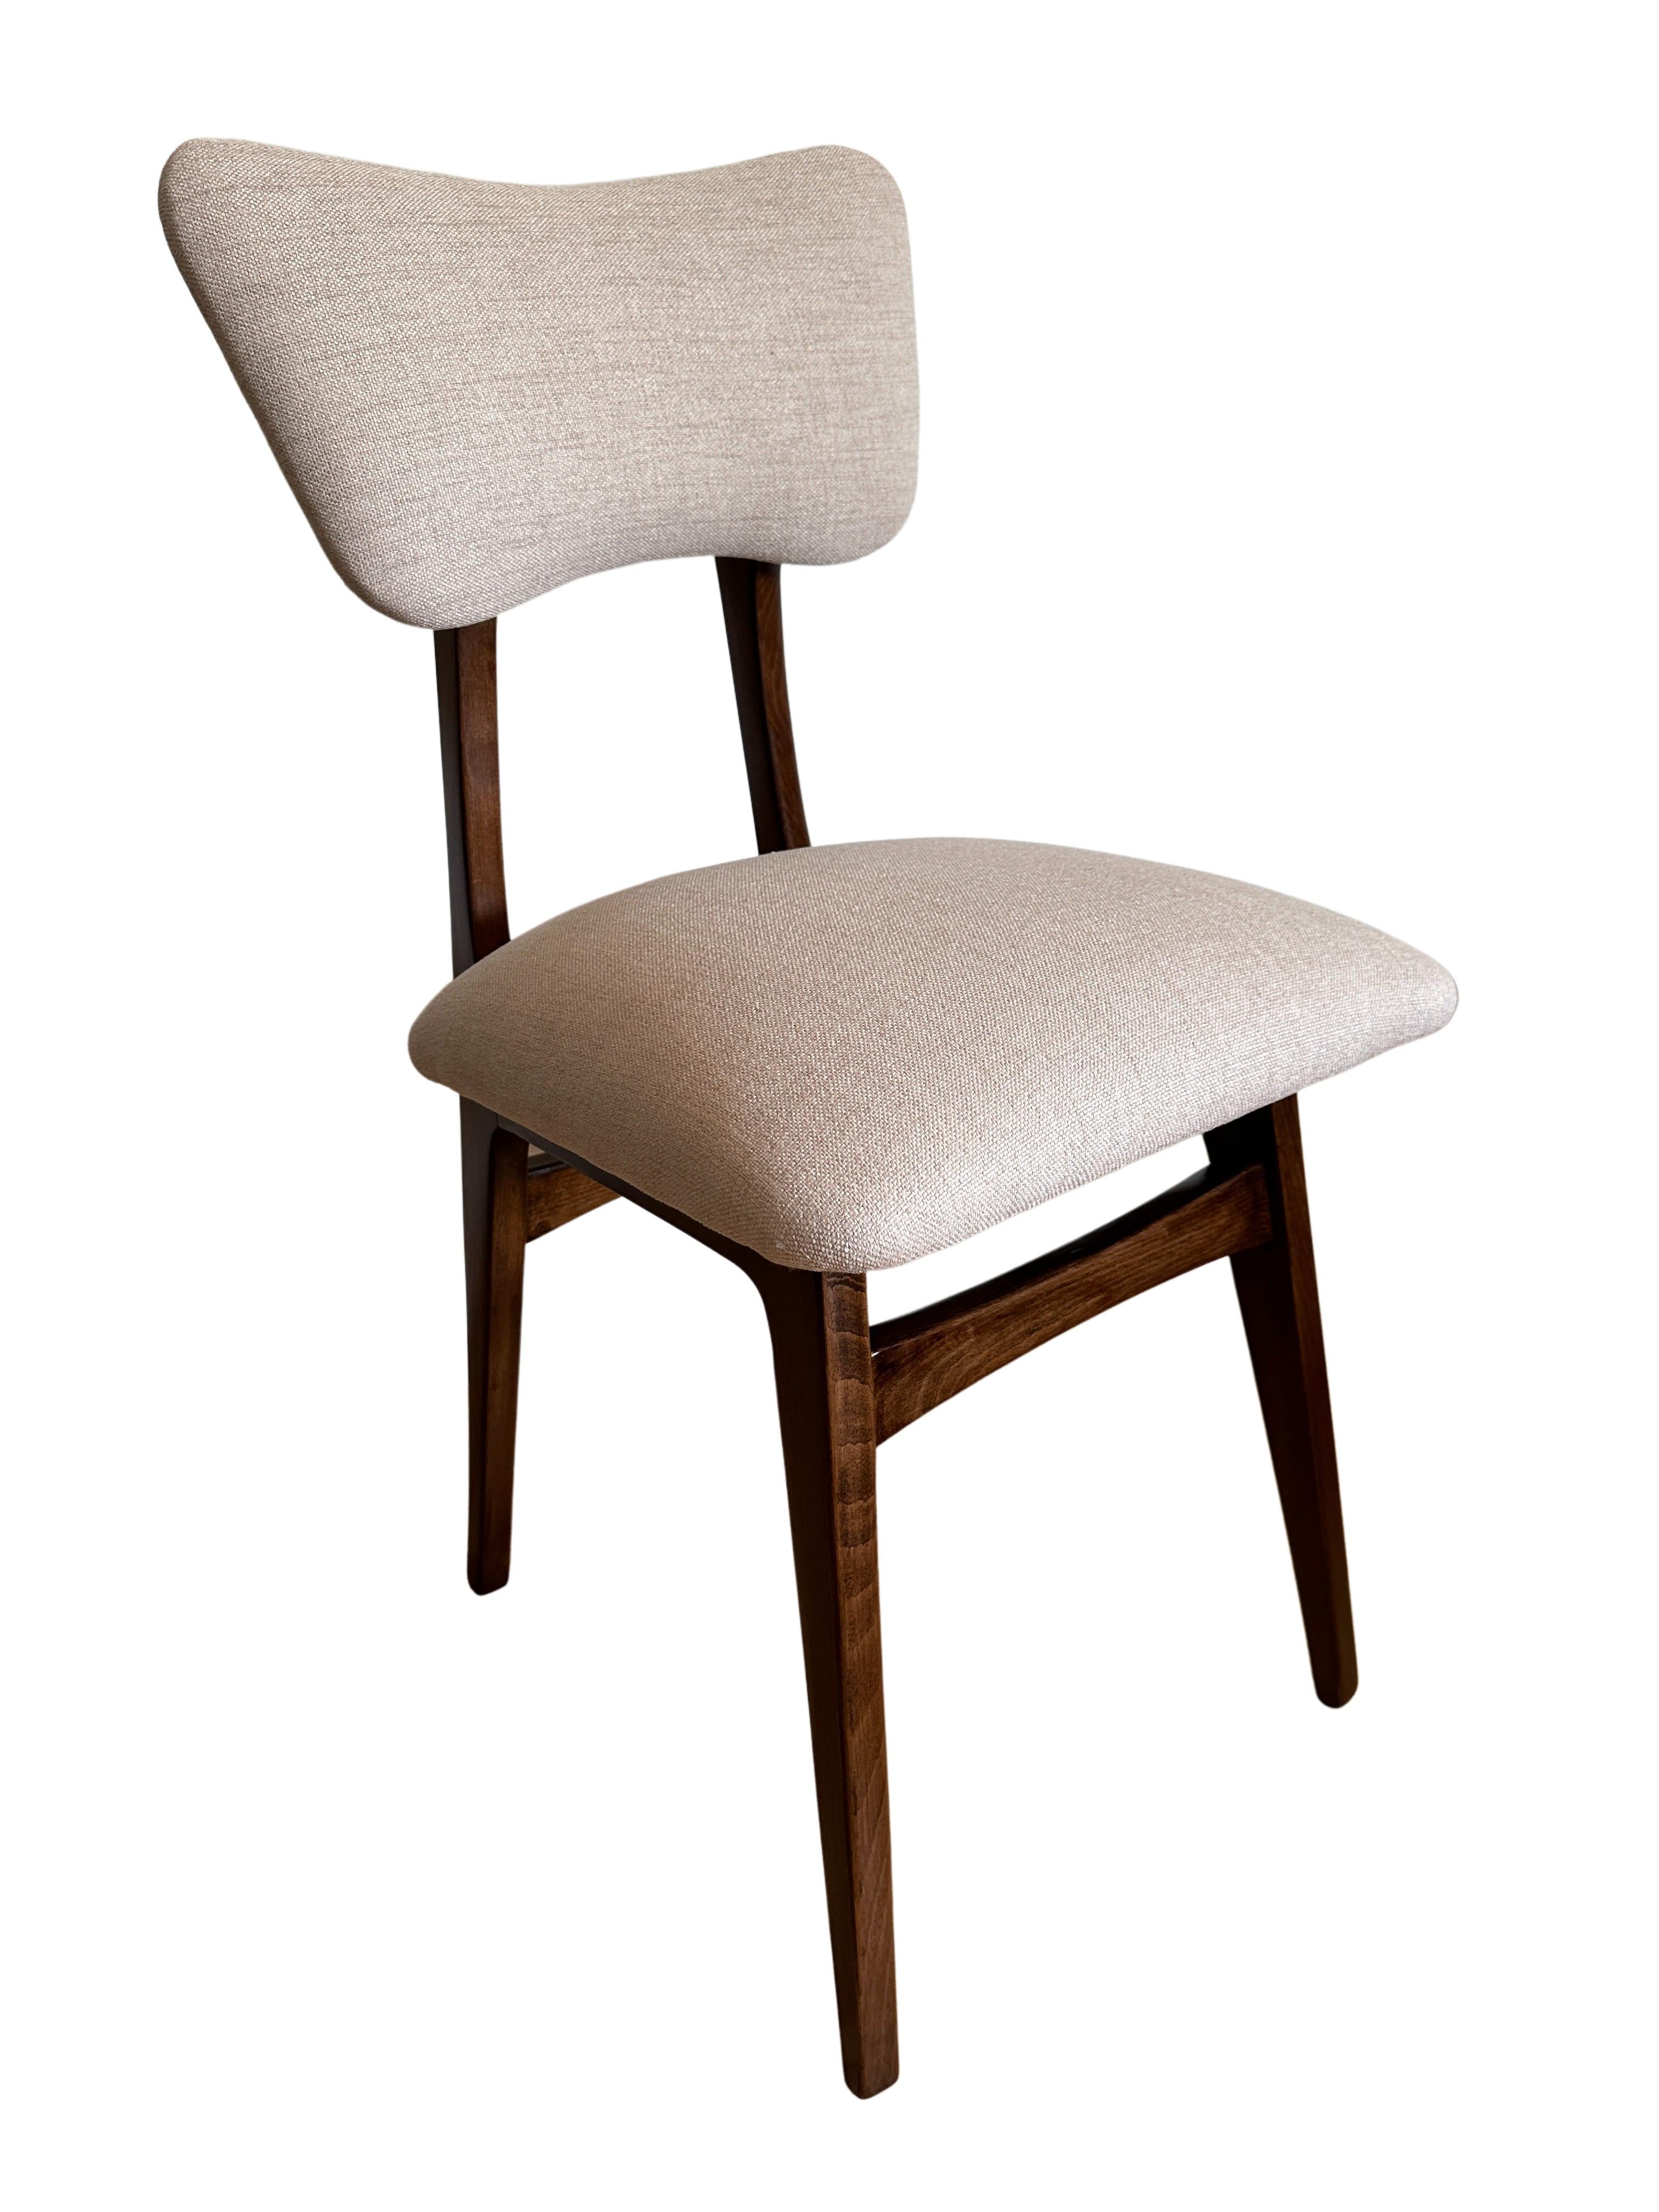 Polish Set of Four Midcentury Beige Dining Chairs, Europe, 1960s For Sale